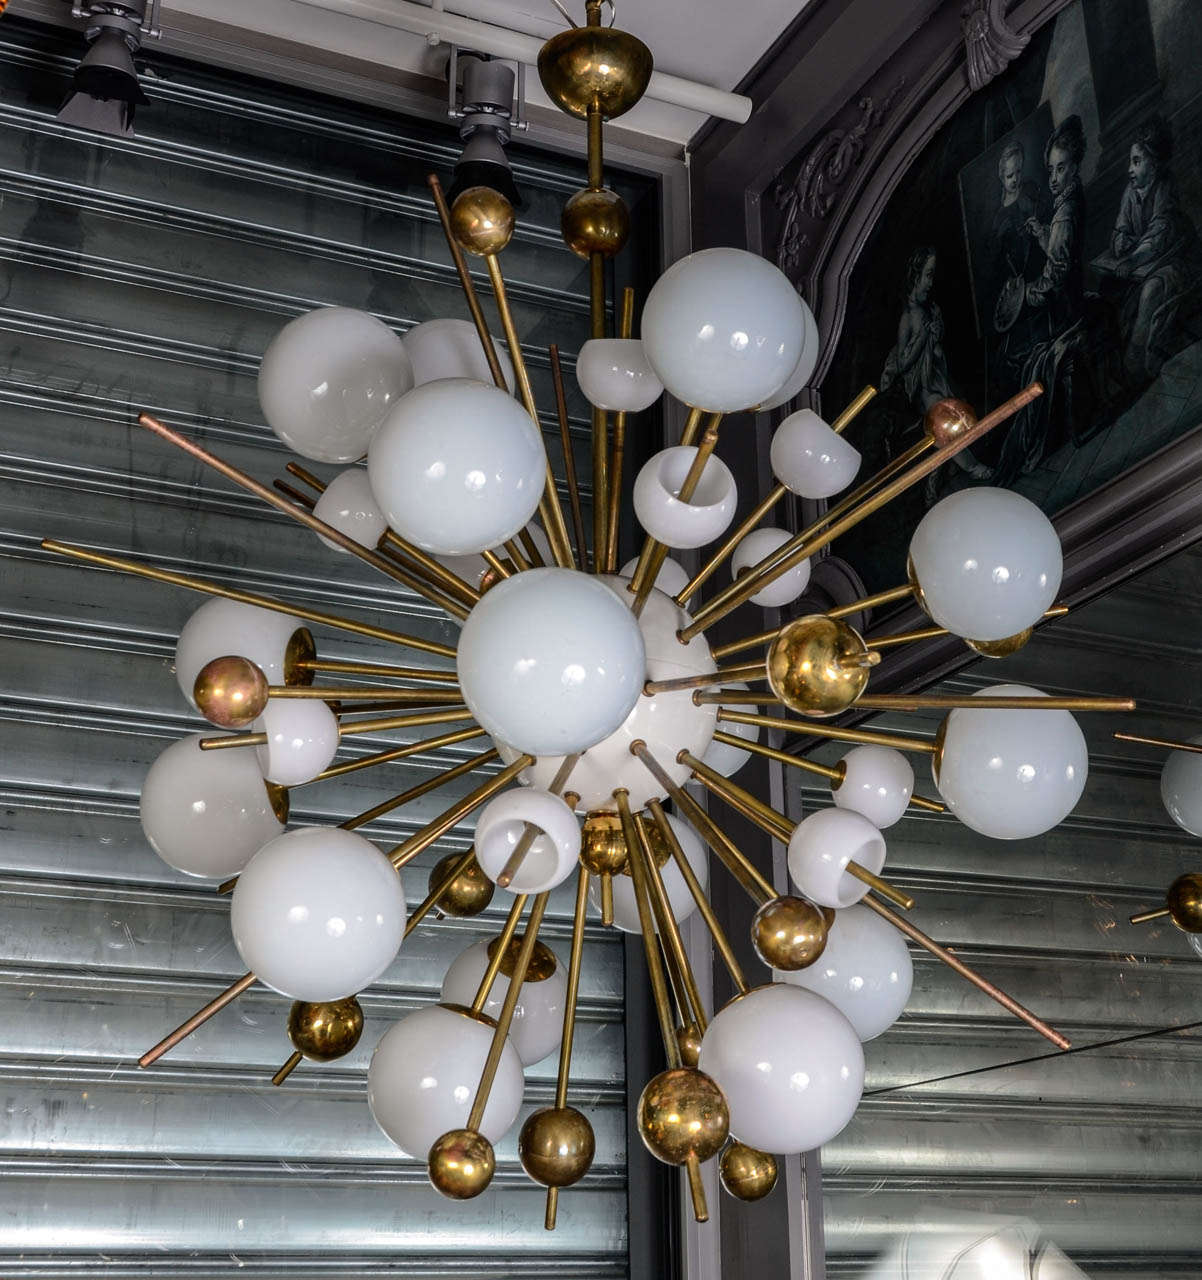 Pair of Spoutnik chandelier from Italy, made in the 1970s, of painted metal, brass and opaline glass. The fixtures are in perfect condition, new electrification, 16 lights per chandelier.

All the arms can be removed from the central piece, for